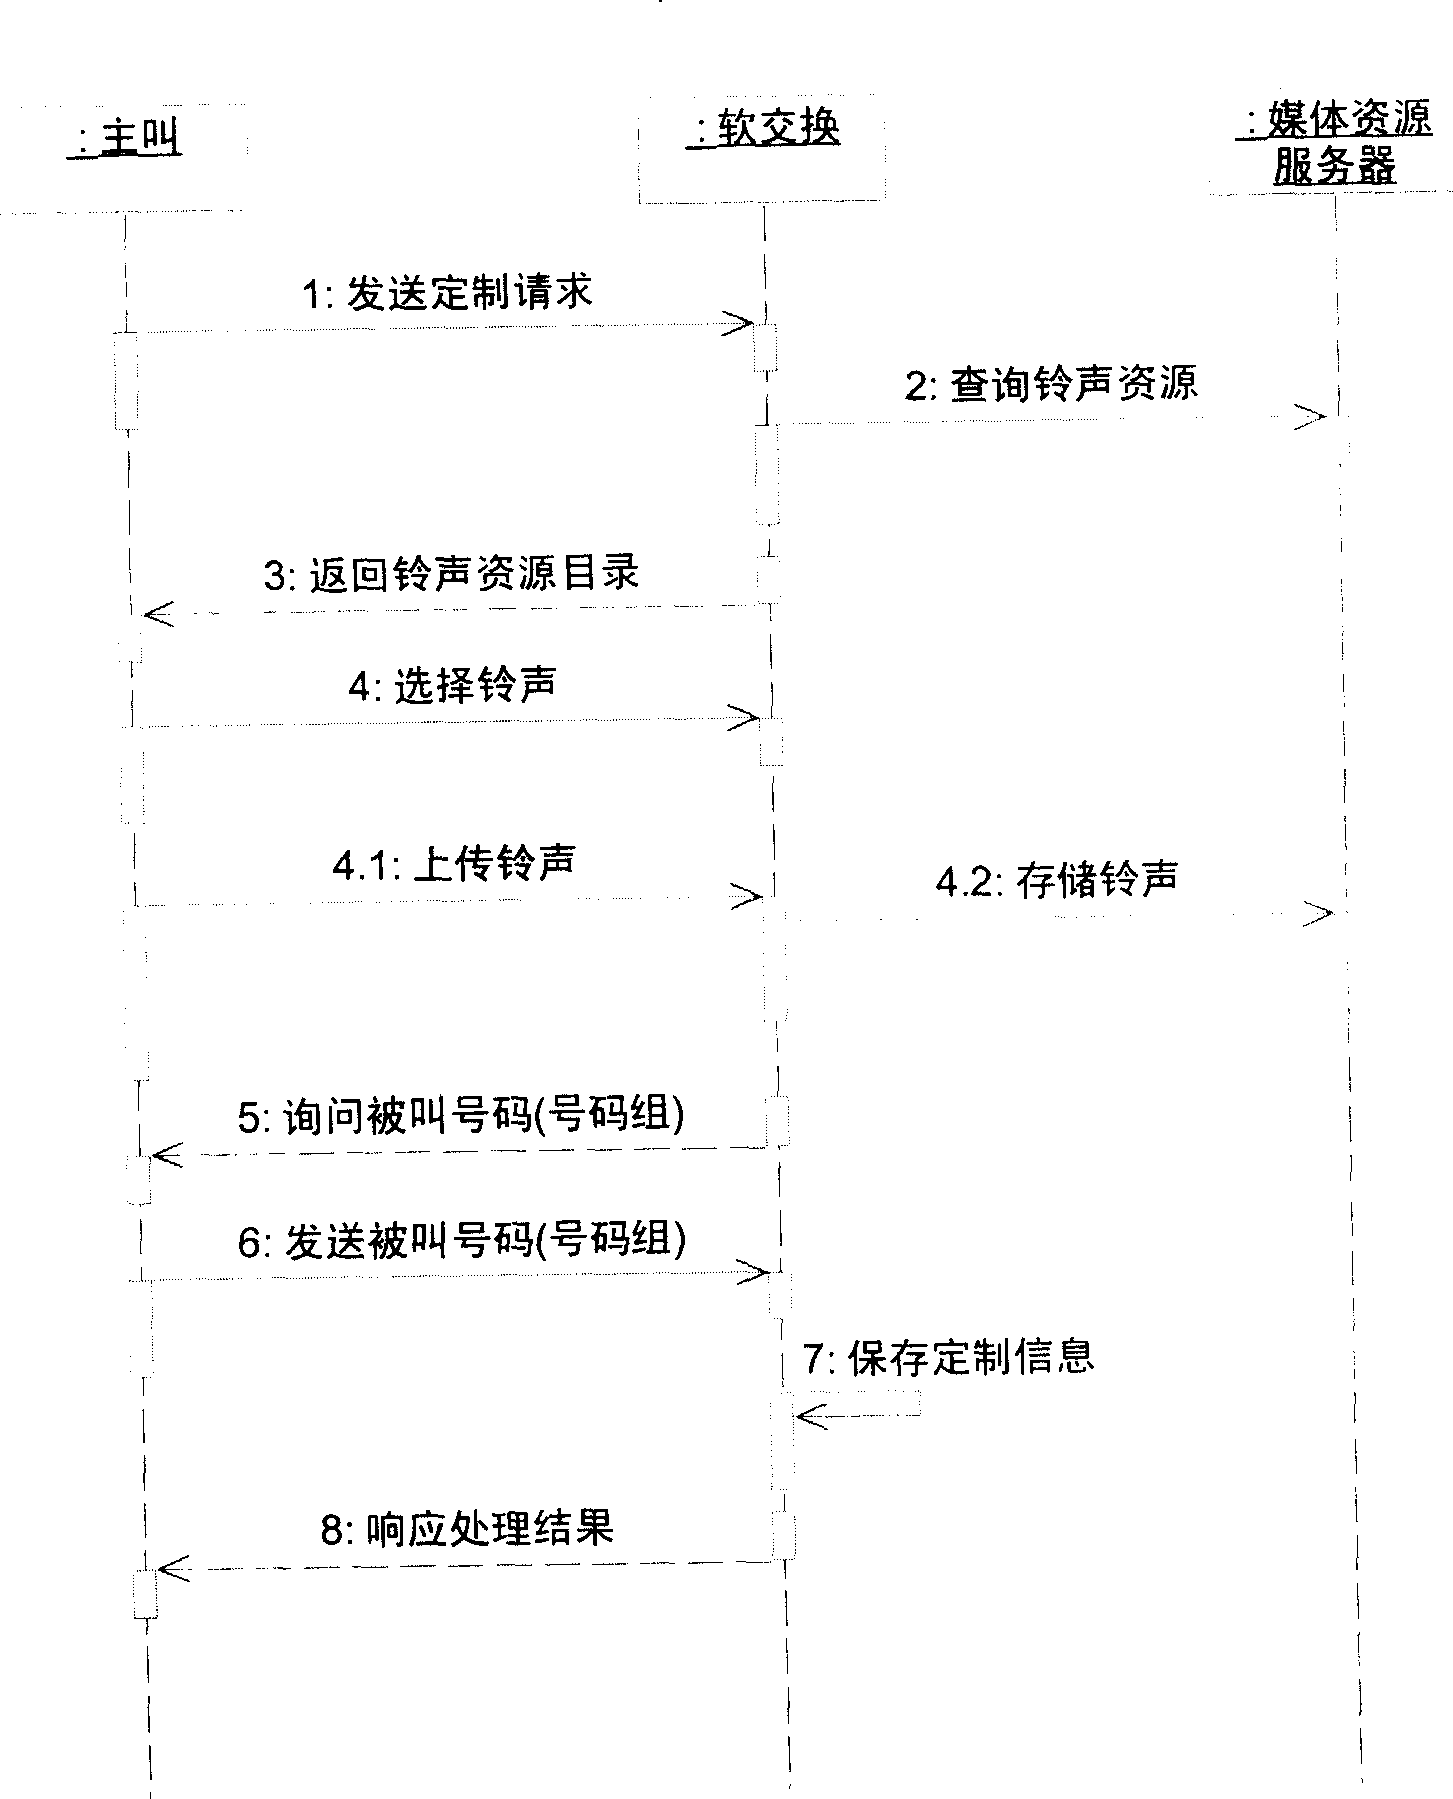 Method and system for receiving and setting multiple color ringing tone